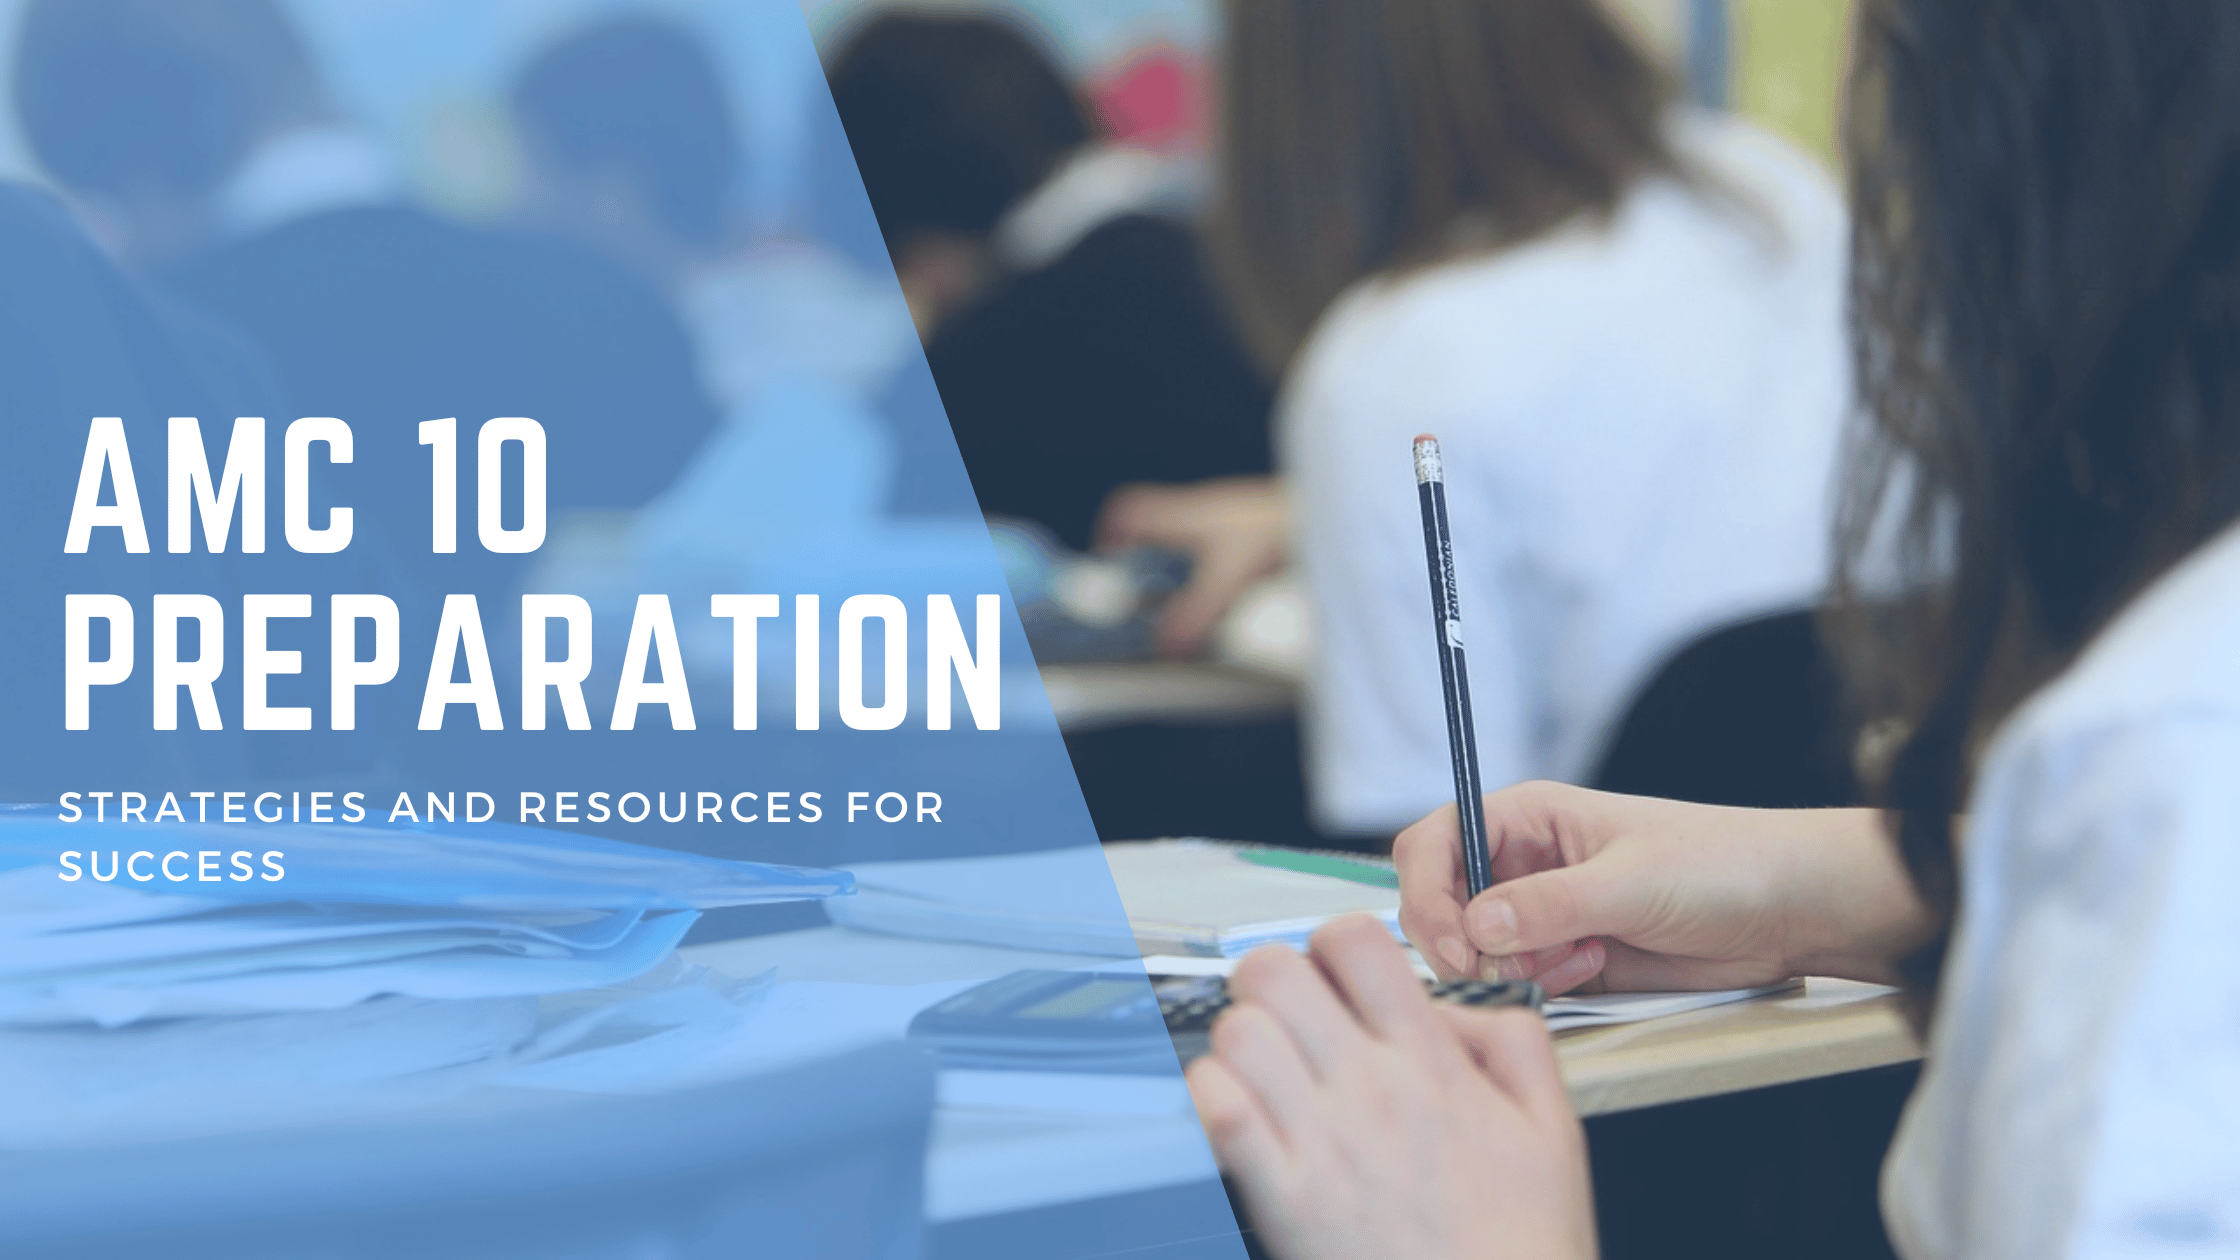 AMC 10 Preparation Strategies and Resources for Success